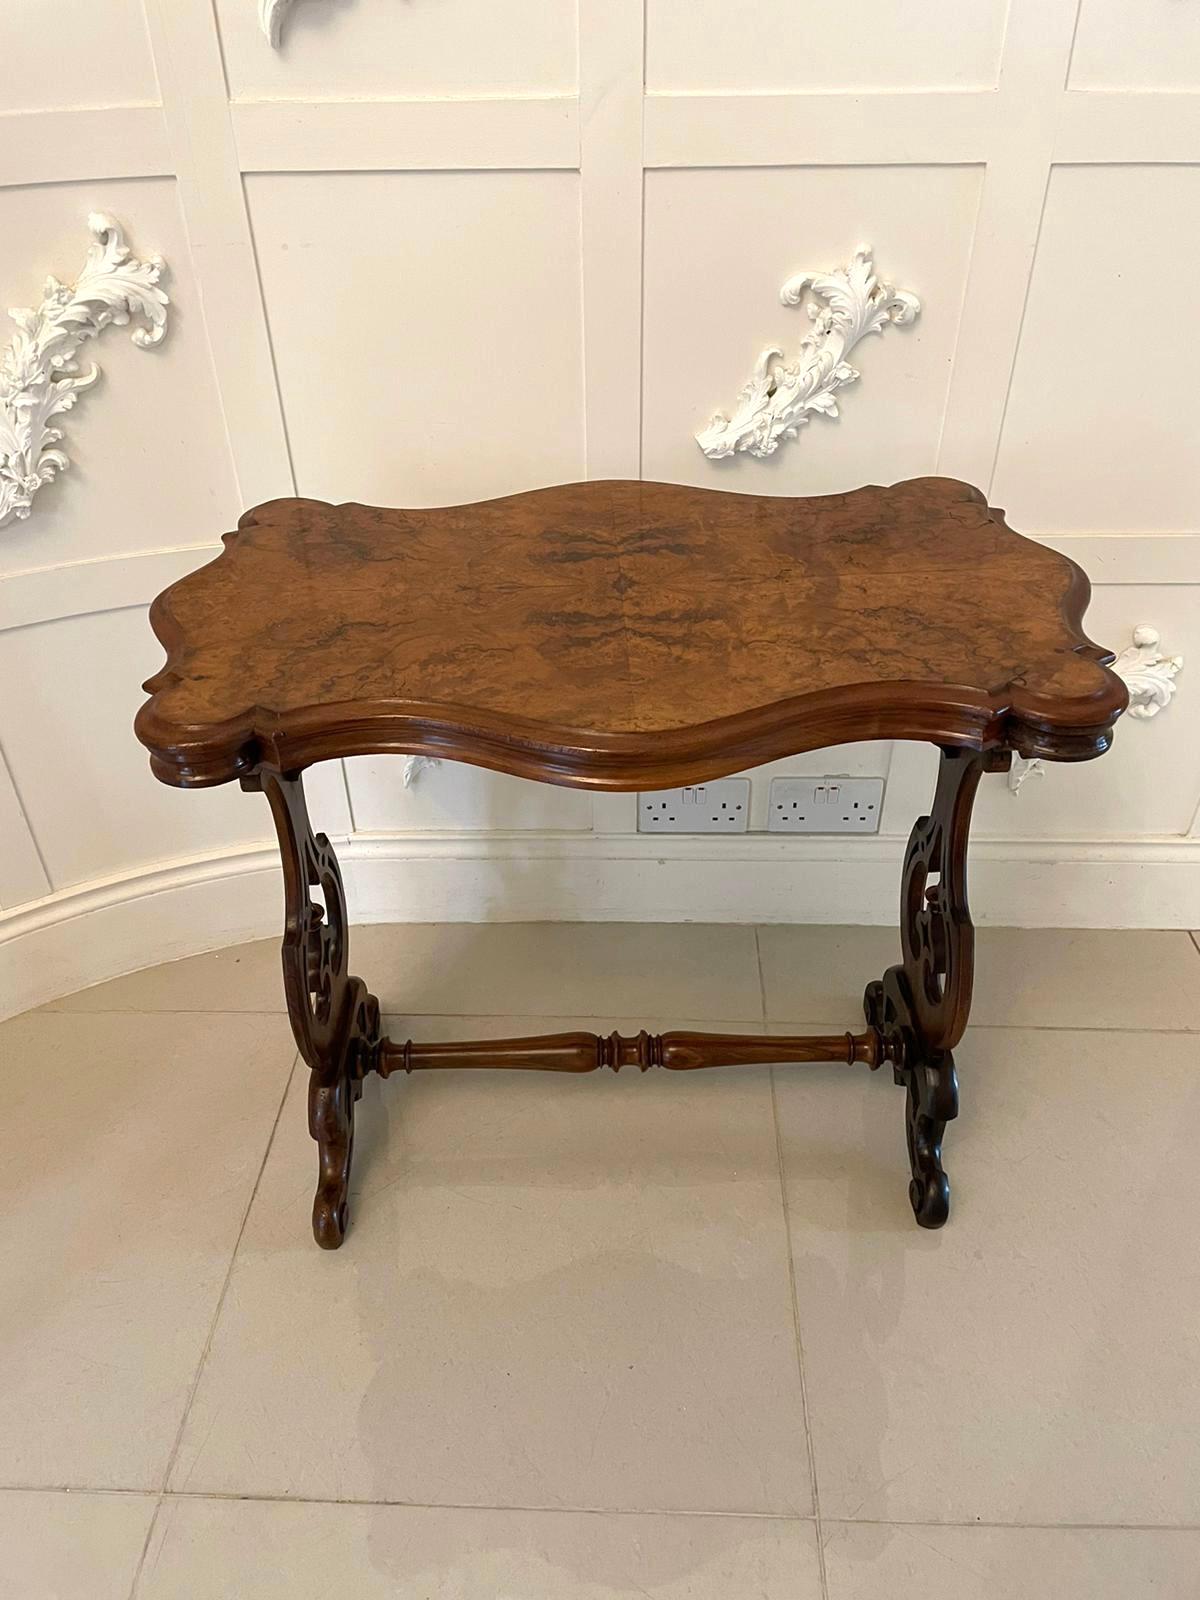 Antique Victorian quality burr walnut shaped centre table having a quality burr walnut serpentine shaped top with a moulded edge, serpentine shaped frieze supported by a solid walnut shaped carved supports raised on shaped carved solid walnut